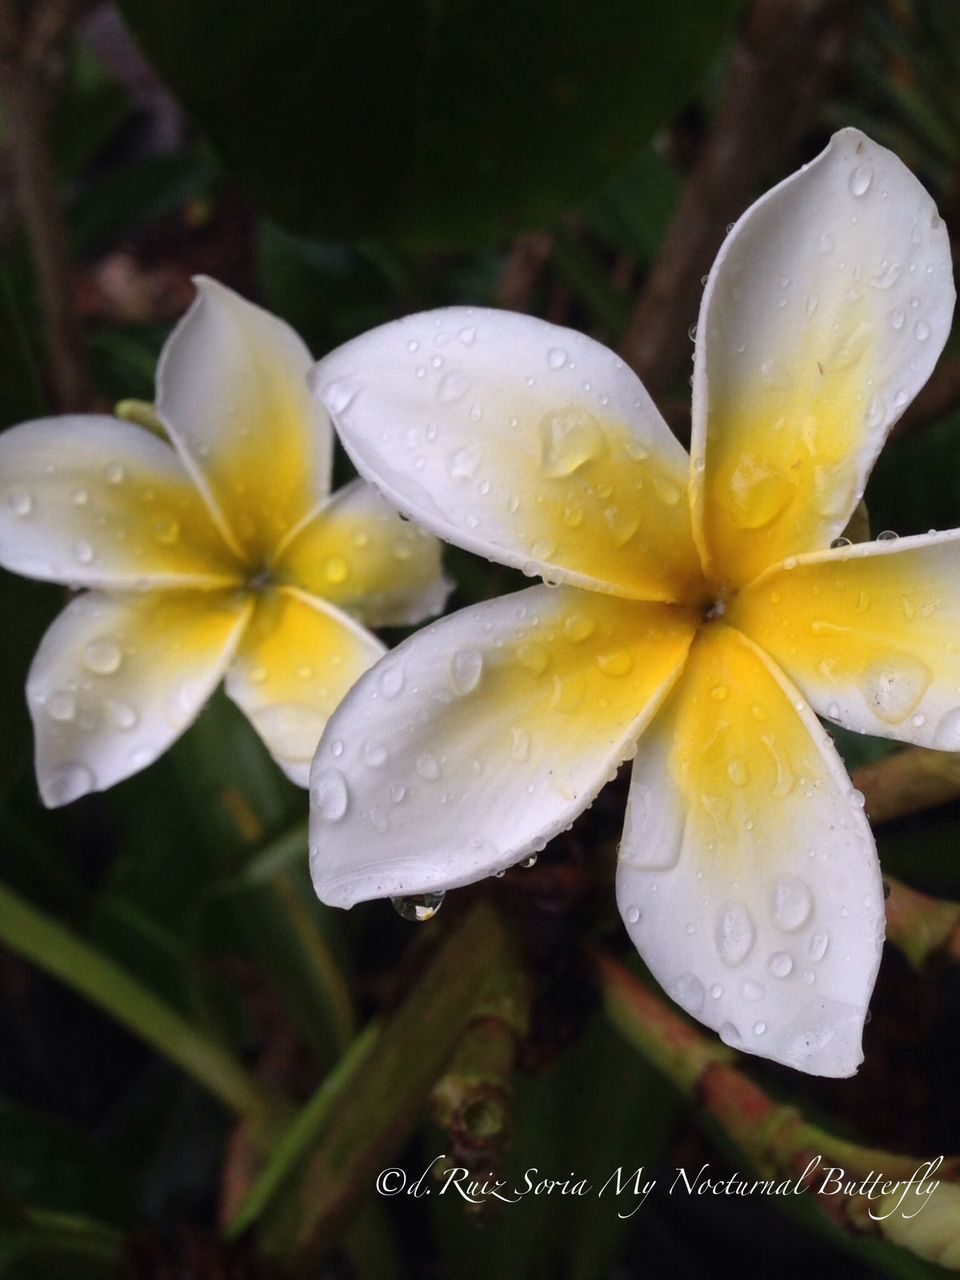 flower, drop, freshness, petal, fragility, water, wet, flower head, beauty in nature, dew, close-up, growth, raindrop, nature, water drop, yellow, blooming, droplet, pollen, purity